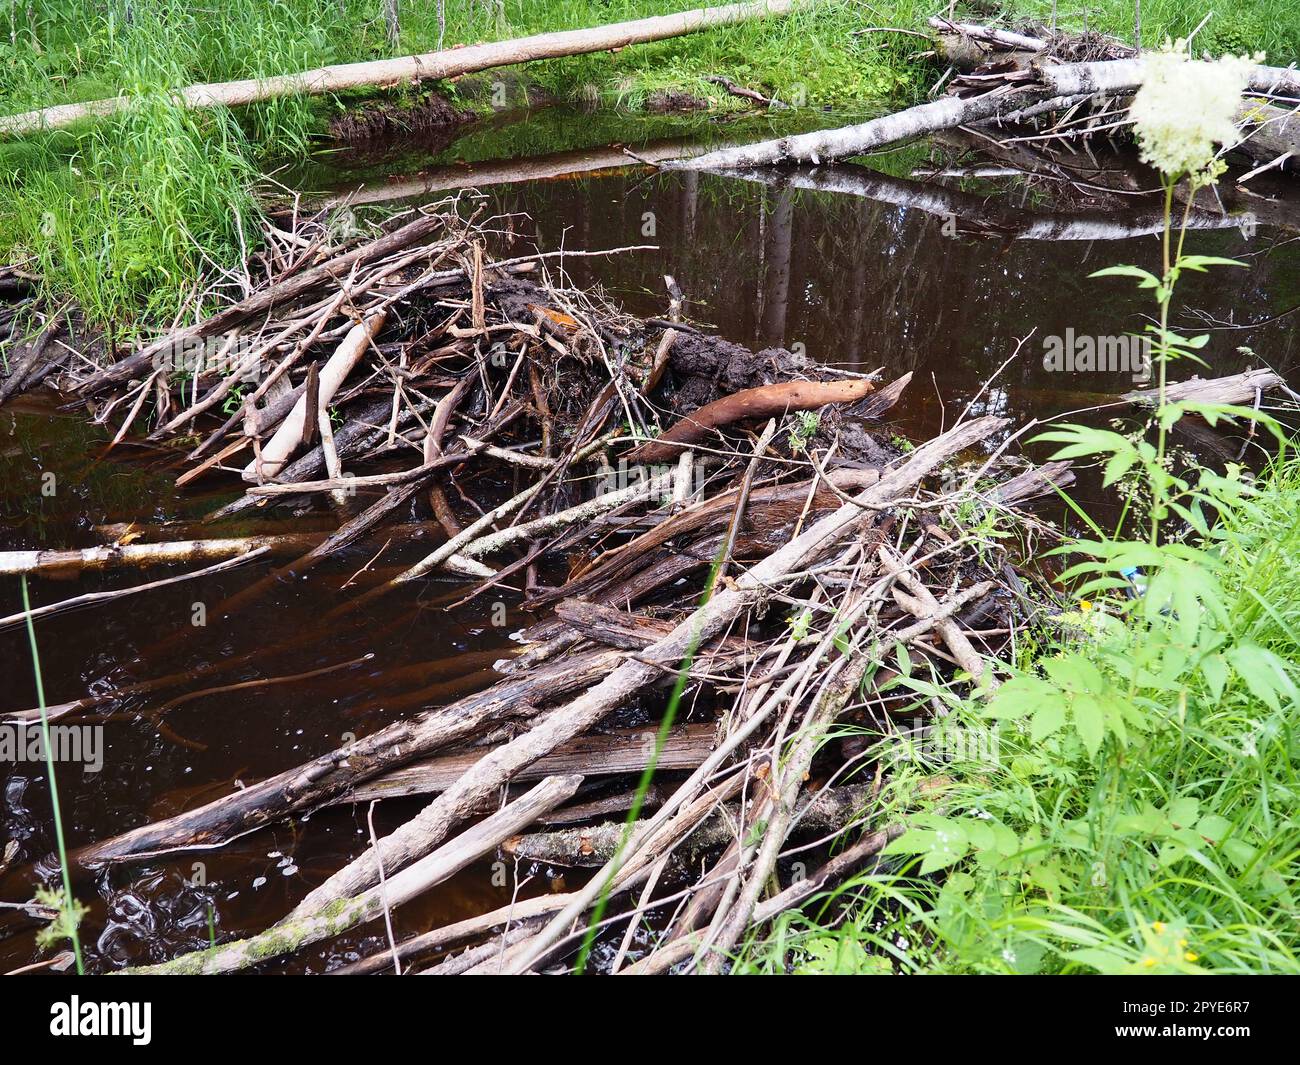 A beaver dam erected by beavers on a river or stream to protect against predators and to facilitate foraging during the winter. The dam materials are wood, branches, leaves, grass, silt, mud, stones Stock Photo